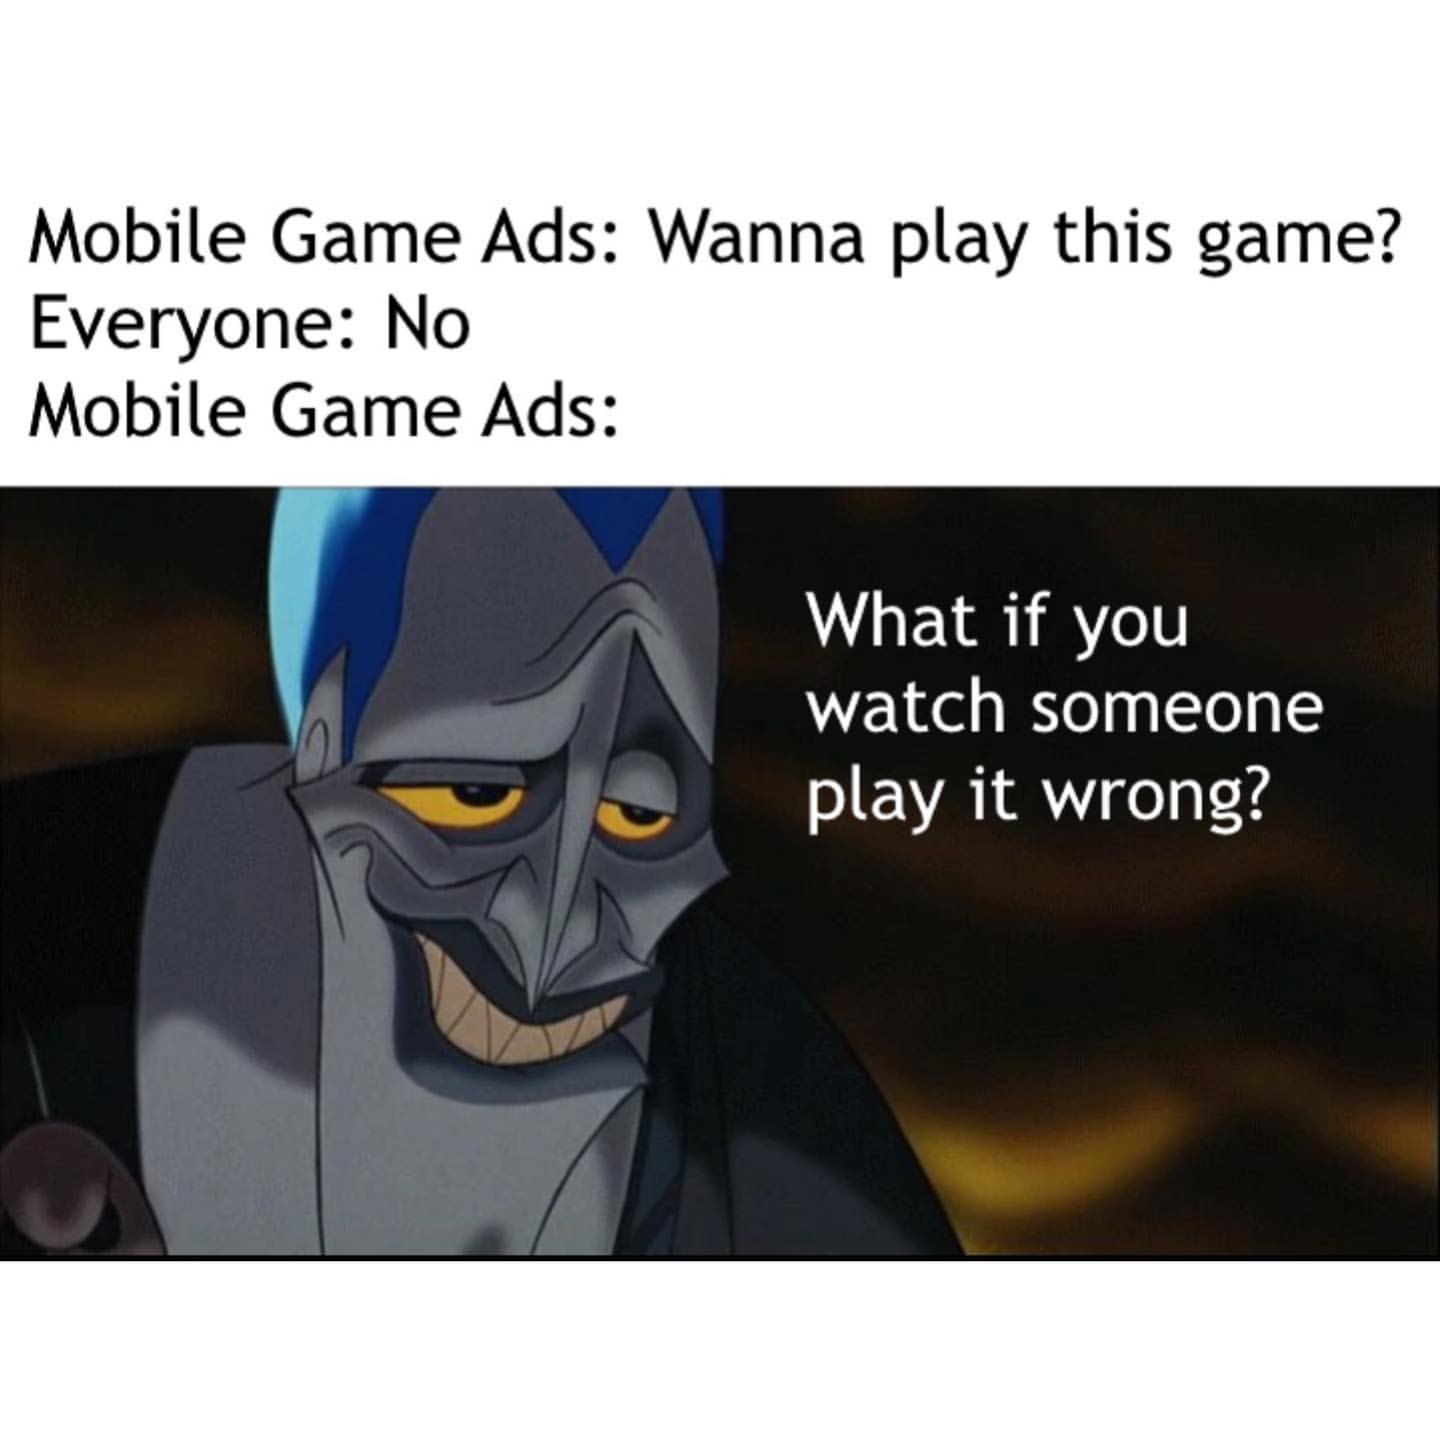 Mobile Game Ads: Wanna play this game? Everyone: No. Mobile Game Ads: What if you watch someone play it wrong?